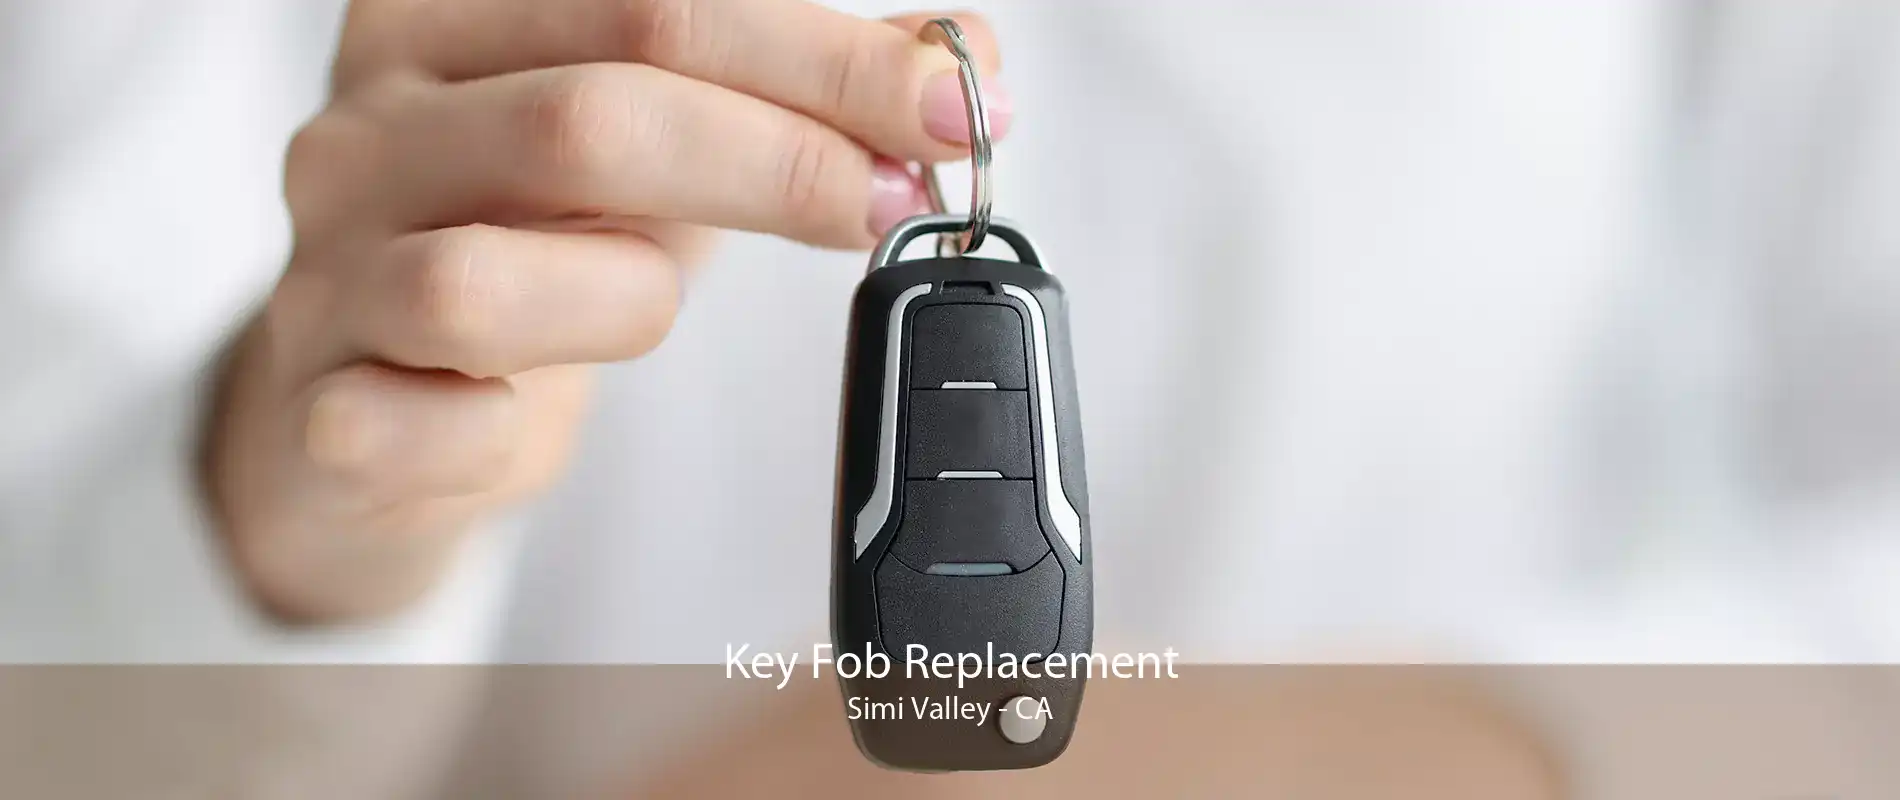 Key Fob Replacement Simi Valley - CA